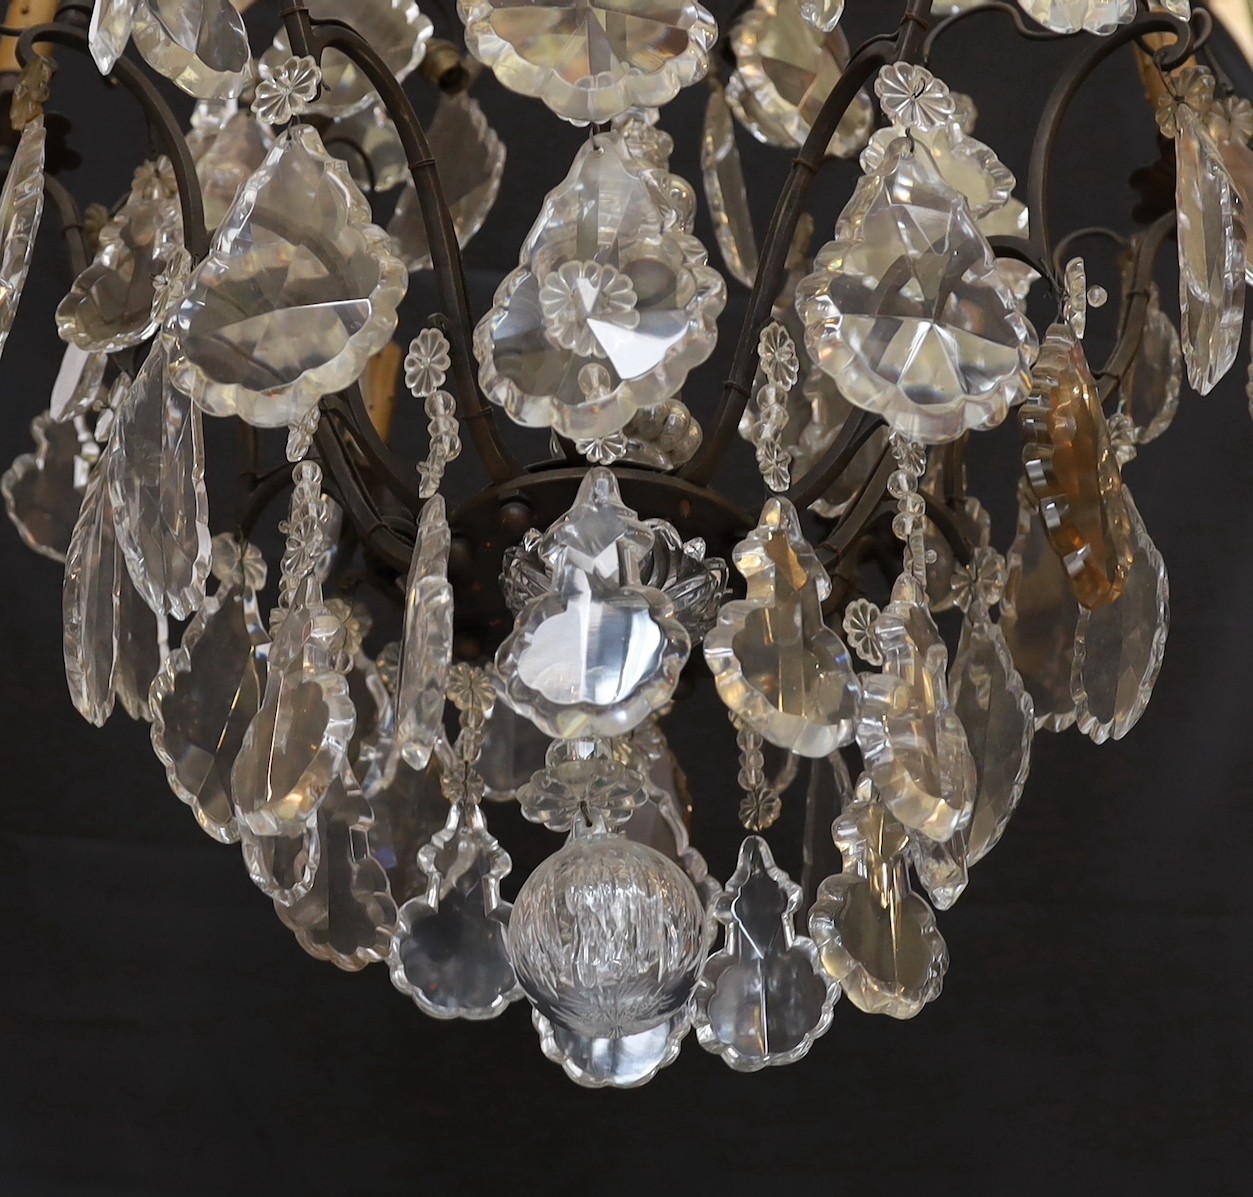 An early 20th century French bronze and cut glass six light chandelier, of particularly ornate design with spear finials, lozenge shaped drops and flower head motifs, height 101cm. width 60cm